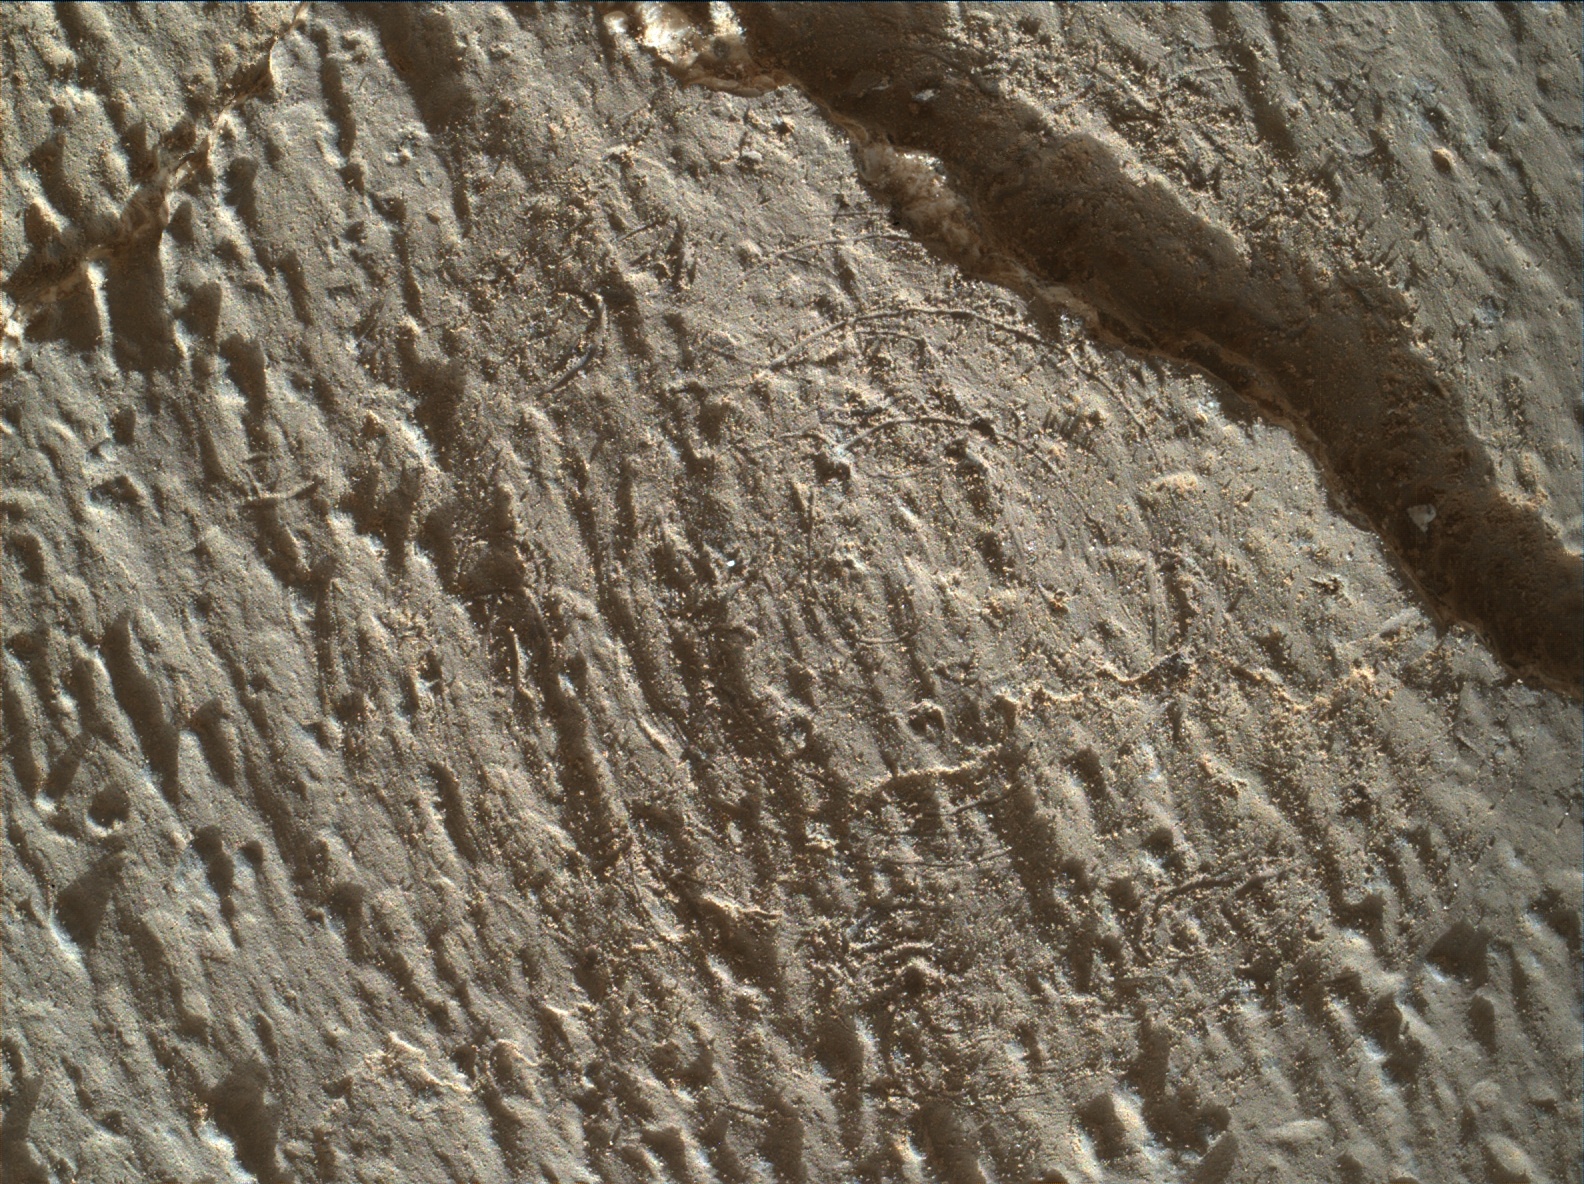 Nasa's Mars rover Curiosity acquired this image using its Mars Hand Lens Imager (MAHLI) on Sol 1276